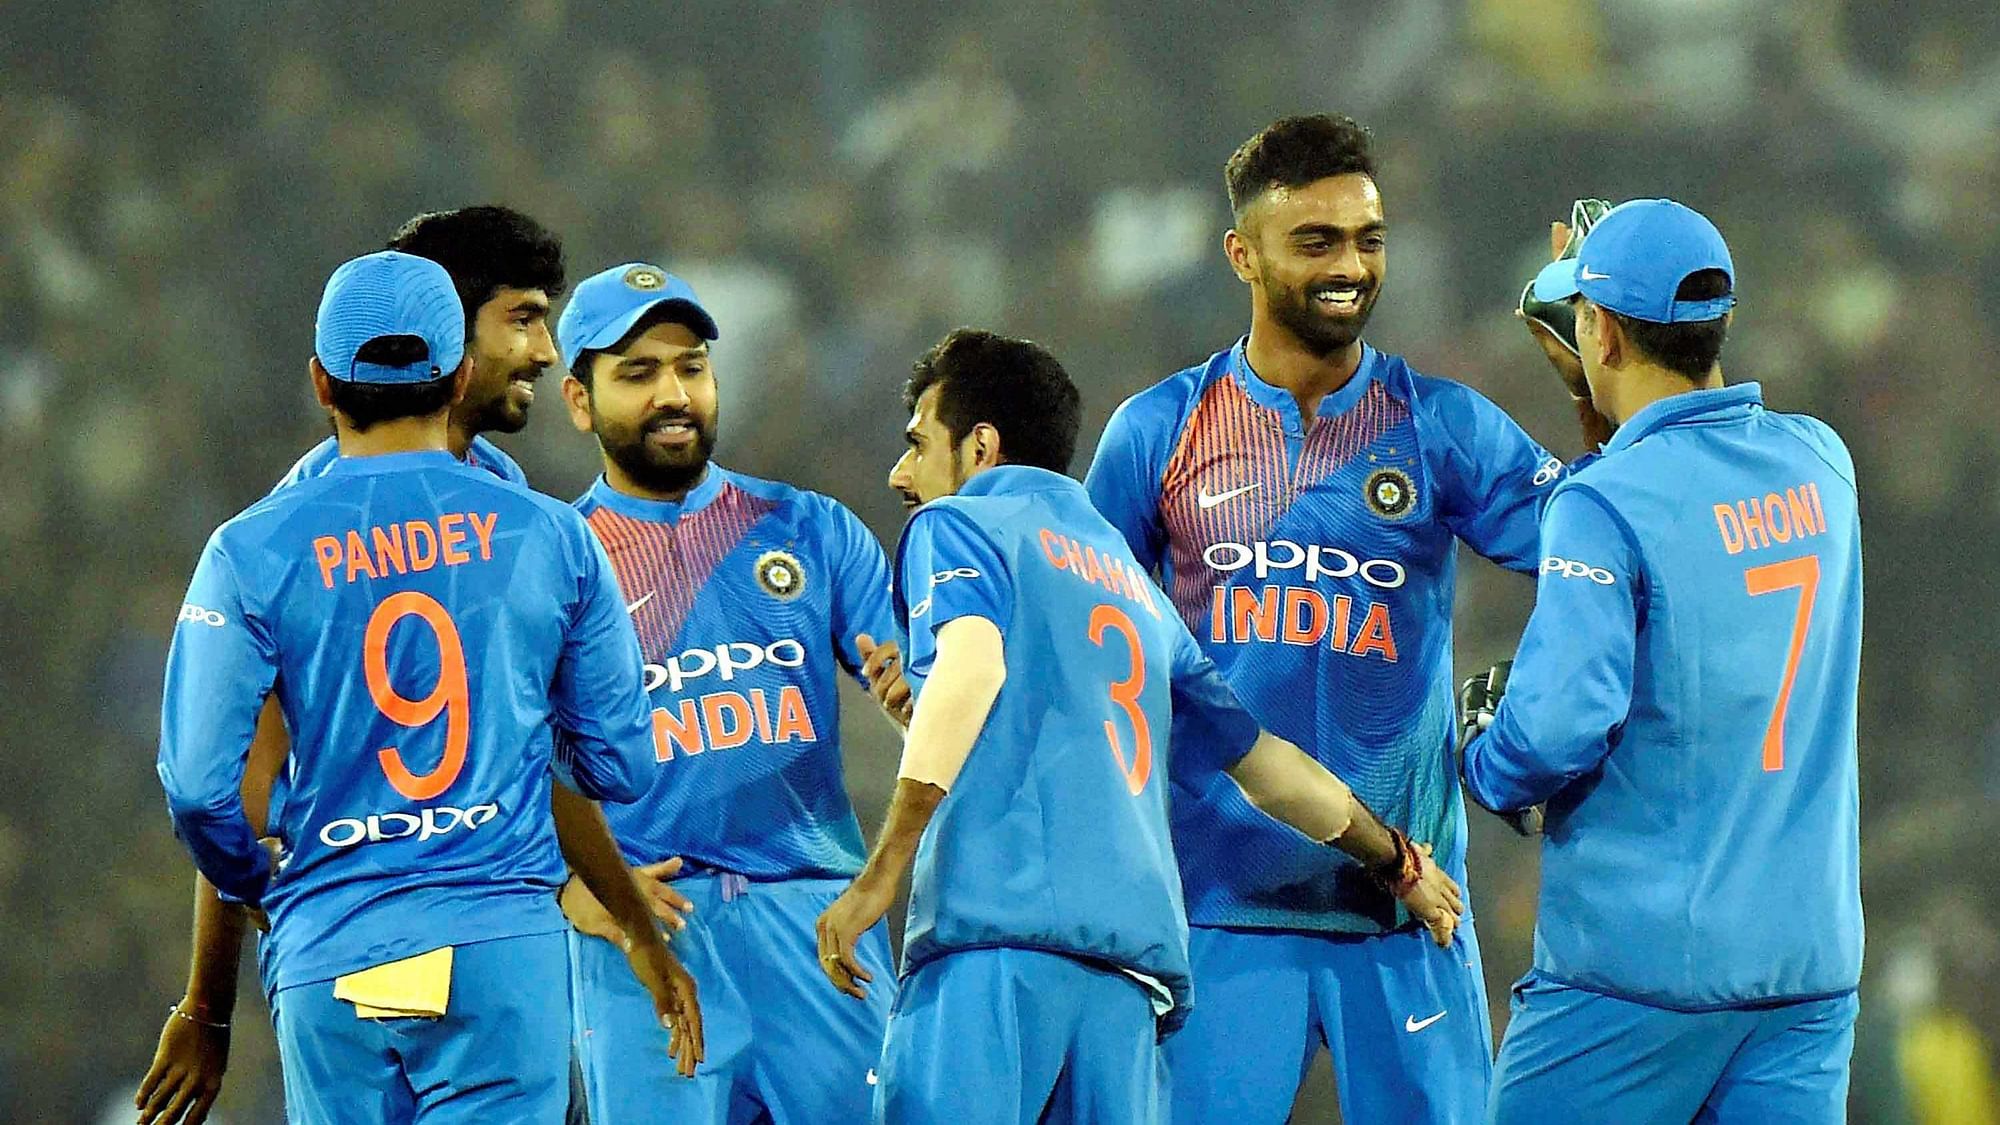 Indian cricketers celebrate the dismissal of a Sri Lankan batsman during the T20 match at Barabati Stadium in Cuttack on Wednesday.&nbsp;